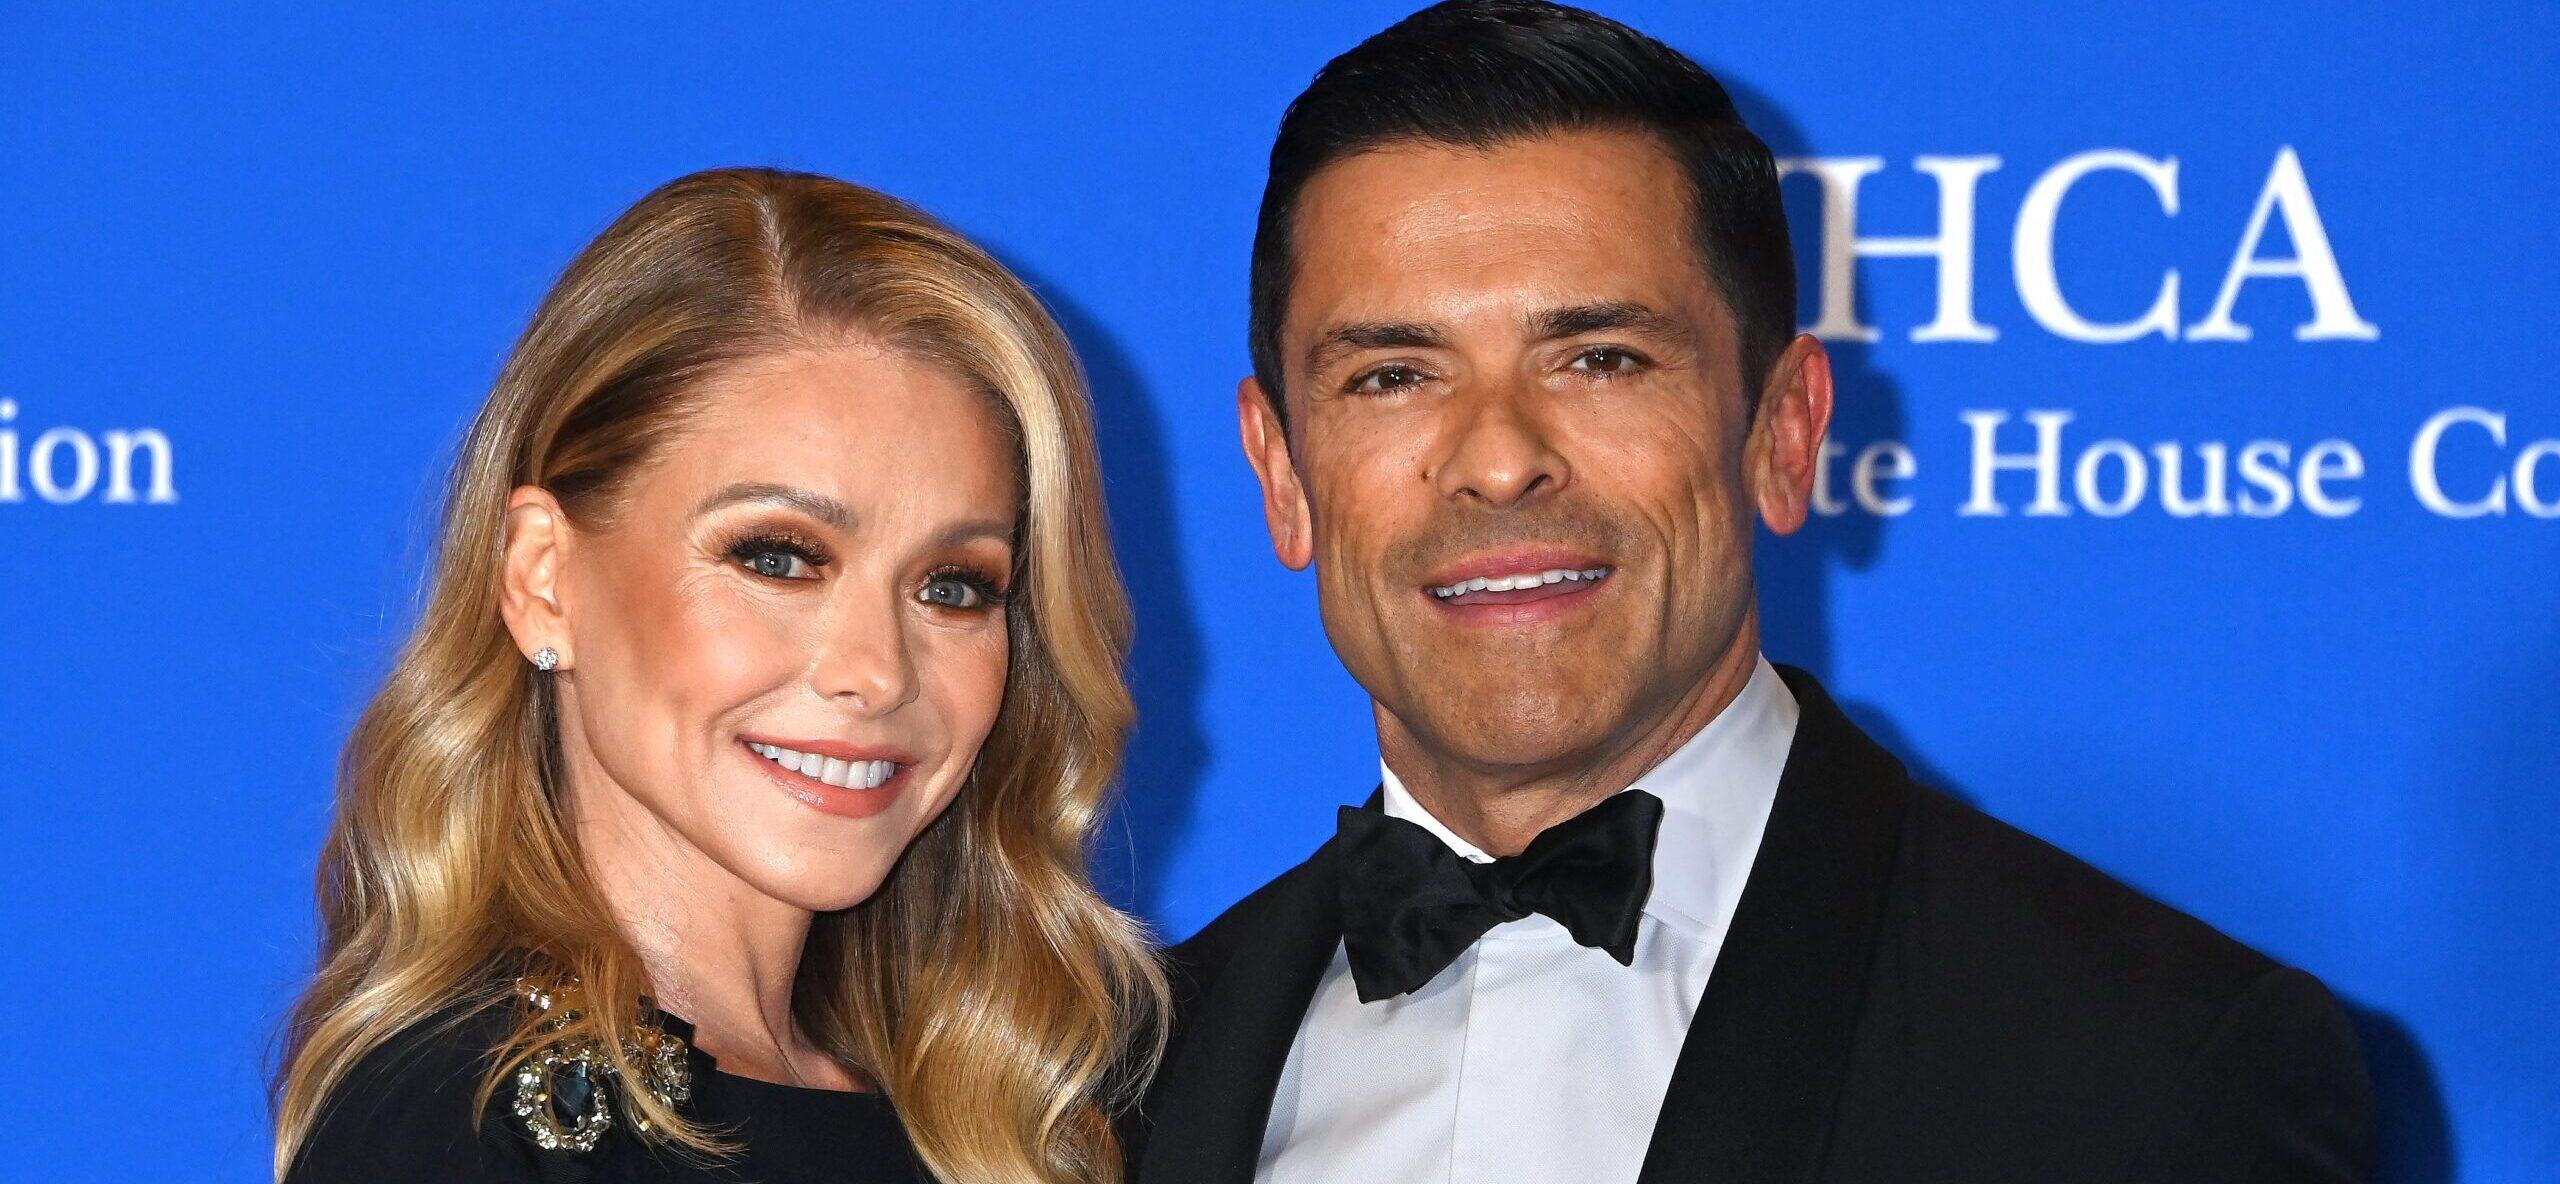 Mark Consuelos Is ‘Sexiest Morning Host’ Amid Backlash For Being Too ‘Sexy’